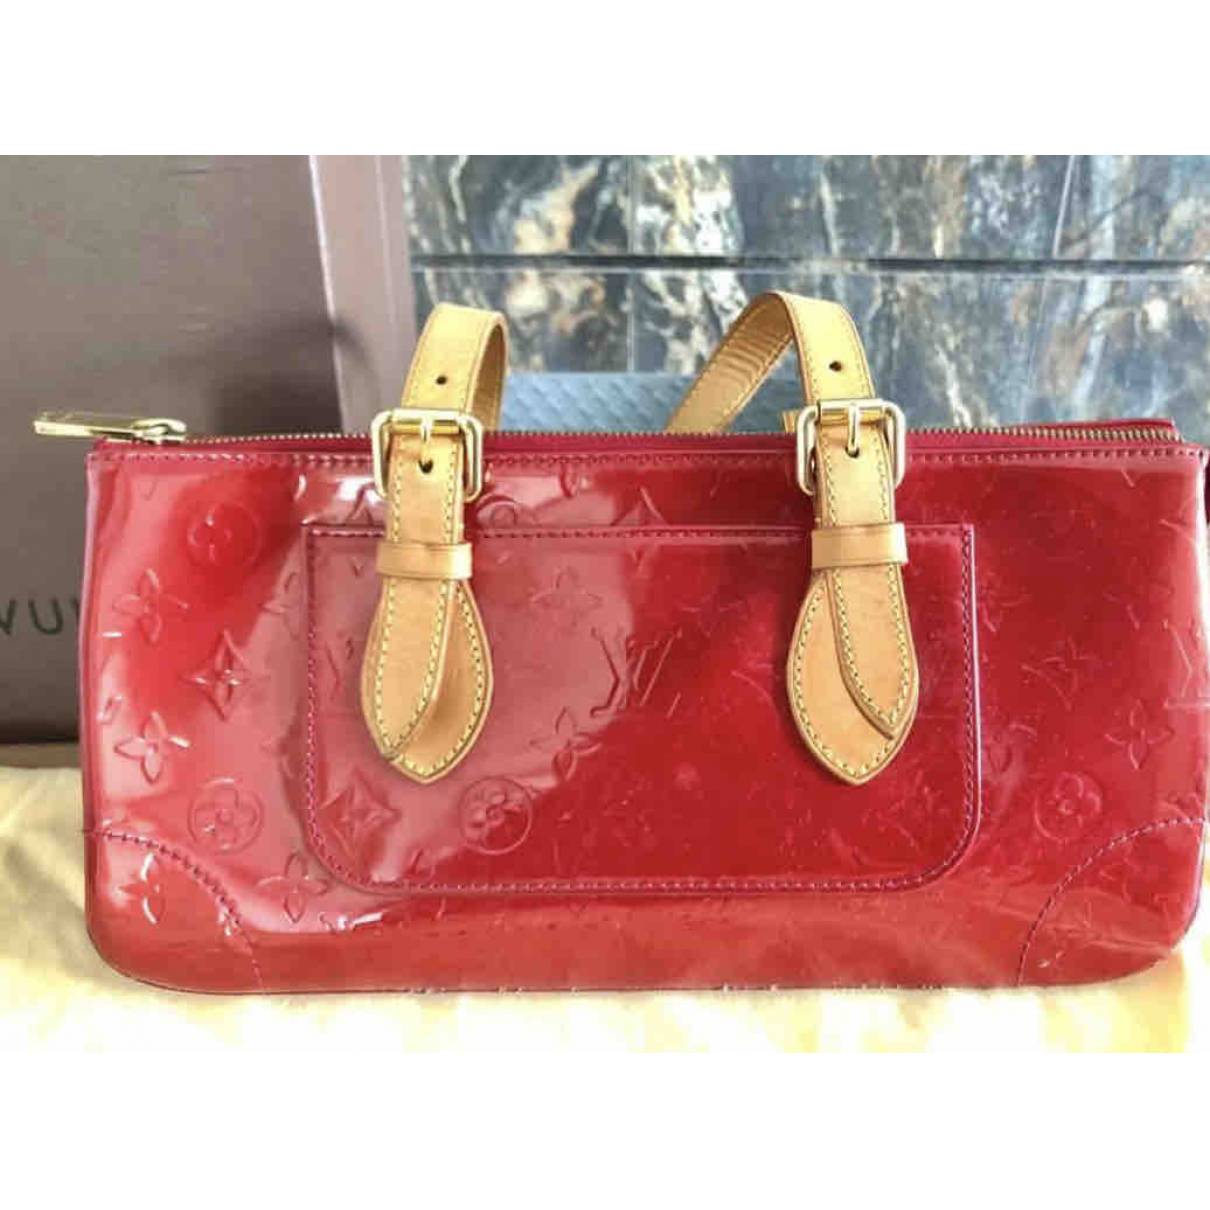 Louis Vuitton - Authenticated Rosewood Handbag - Patent Leather Red Plain for Women, Very Good Condition